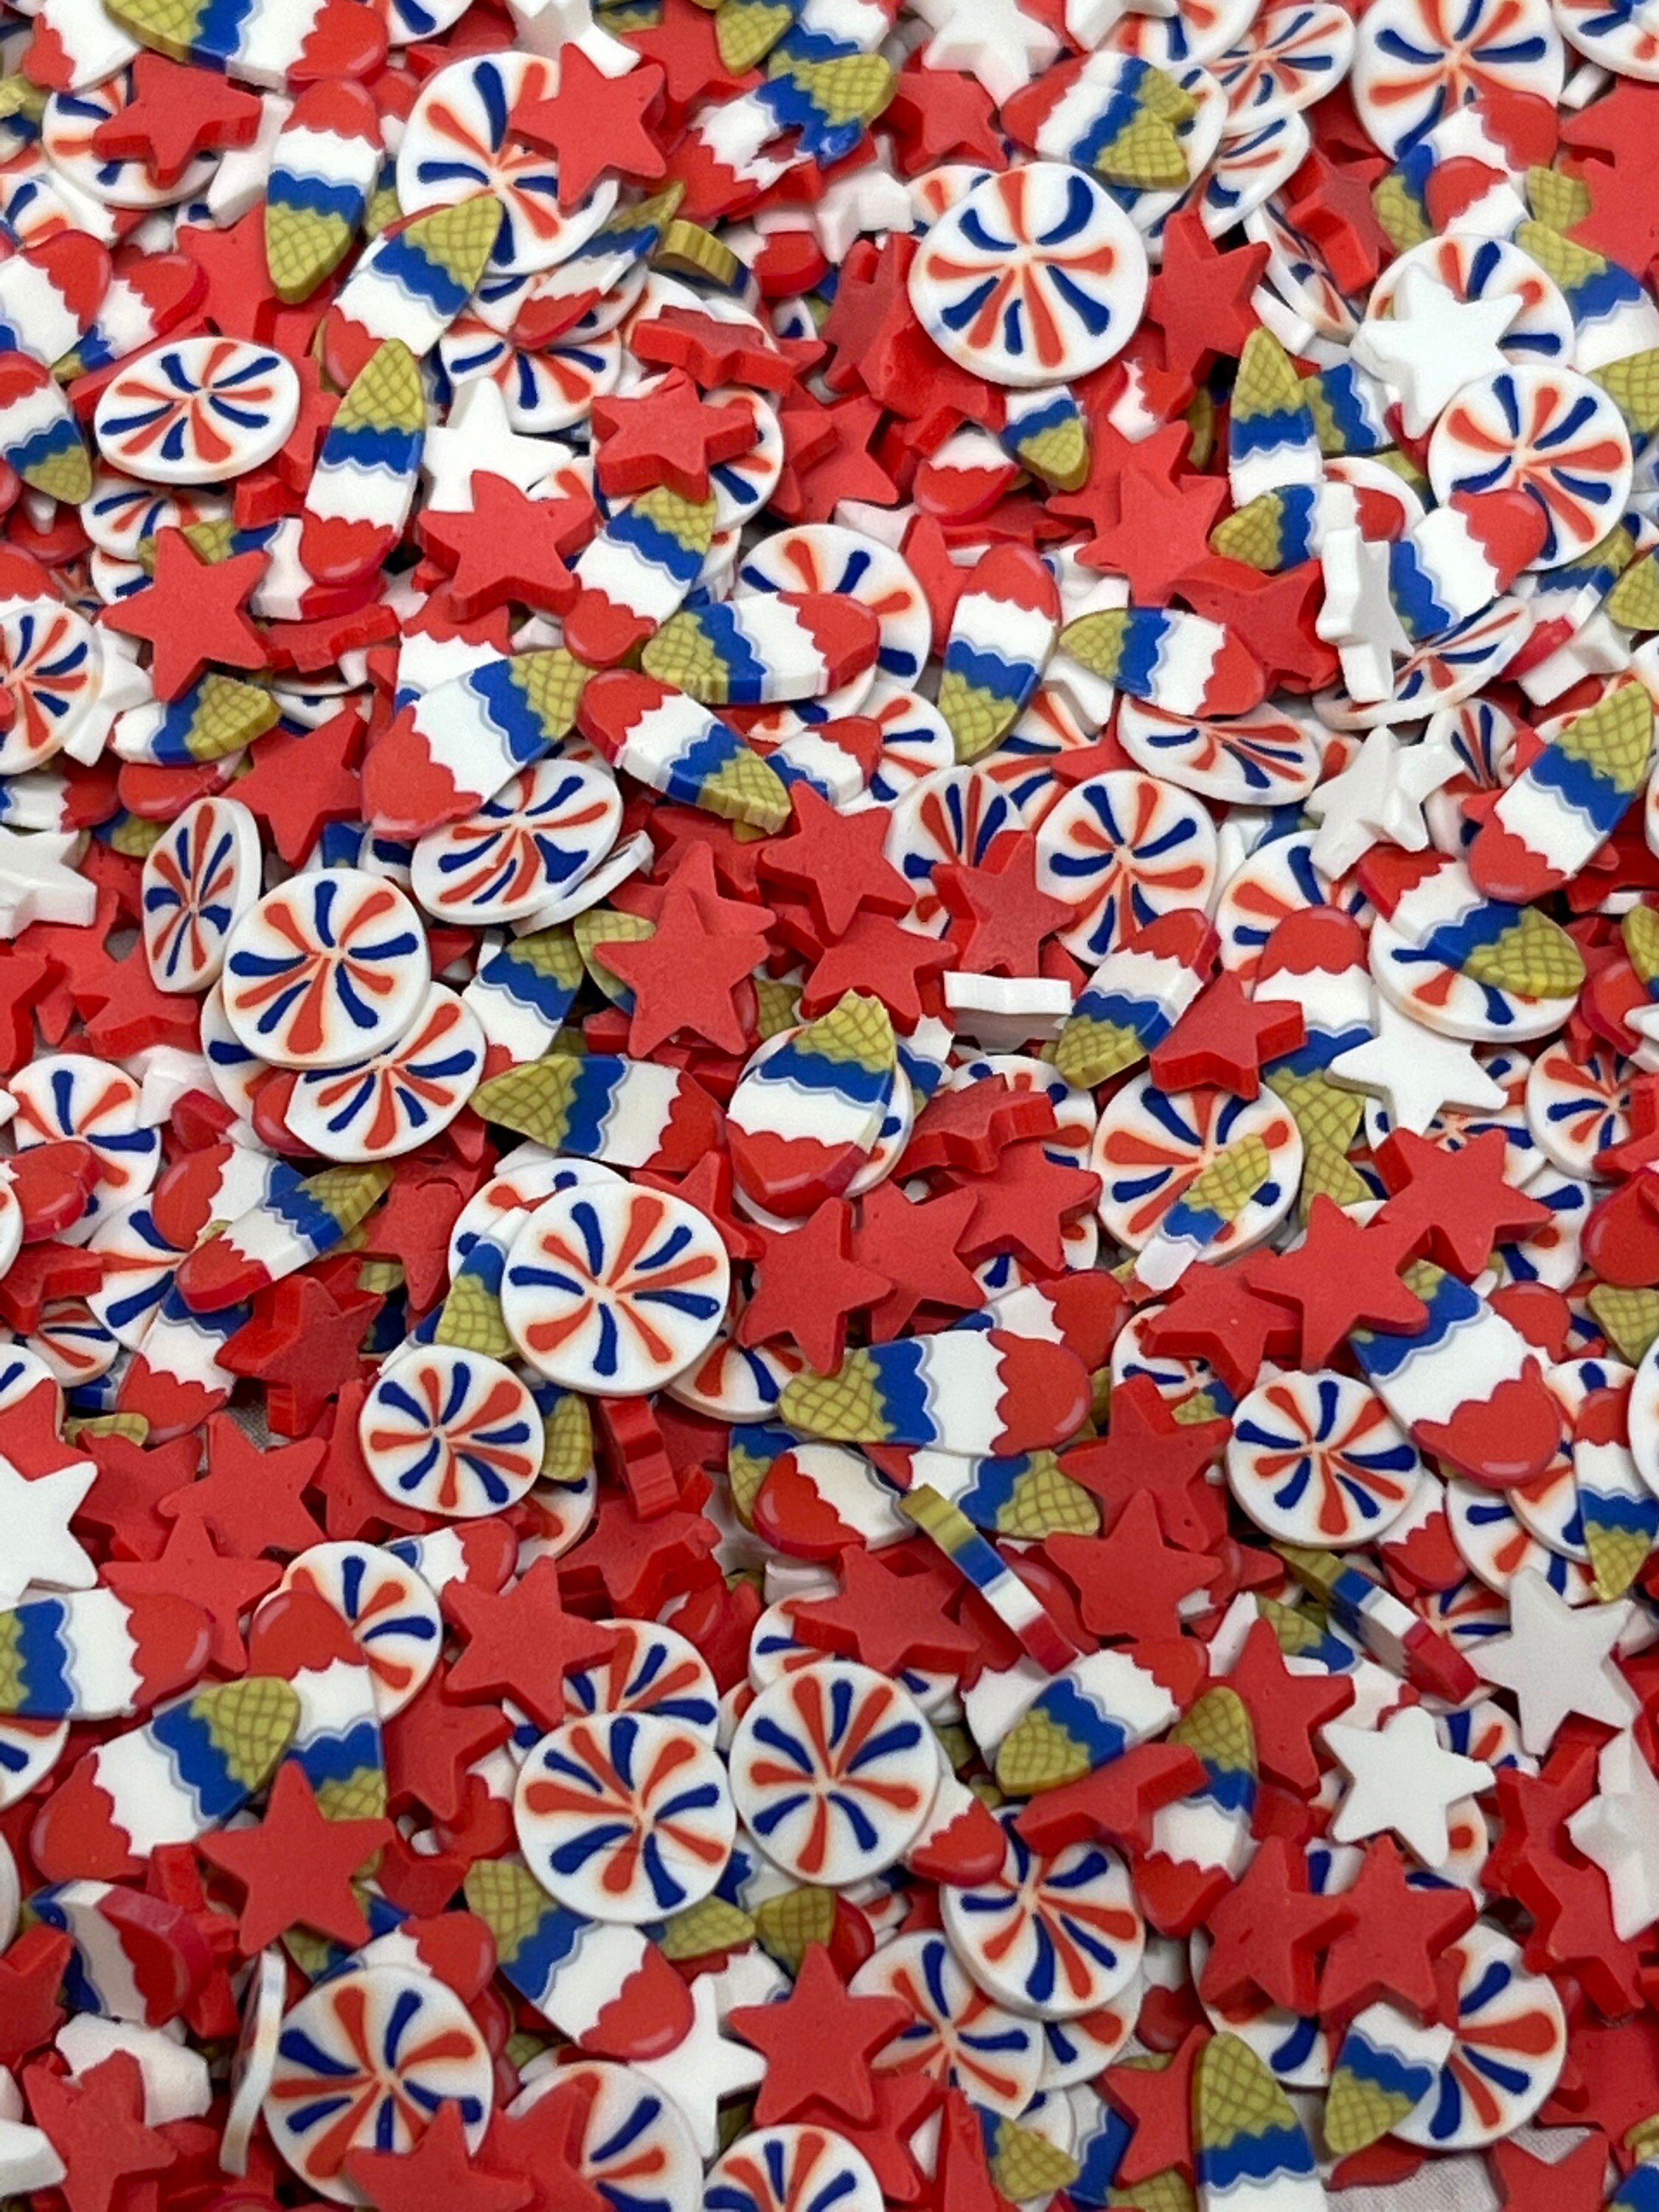 M&M Candy Red Blue 4th of July Fimo Slices Fake Clay Sprinkles Decoden